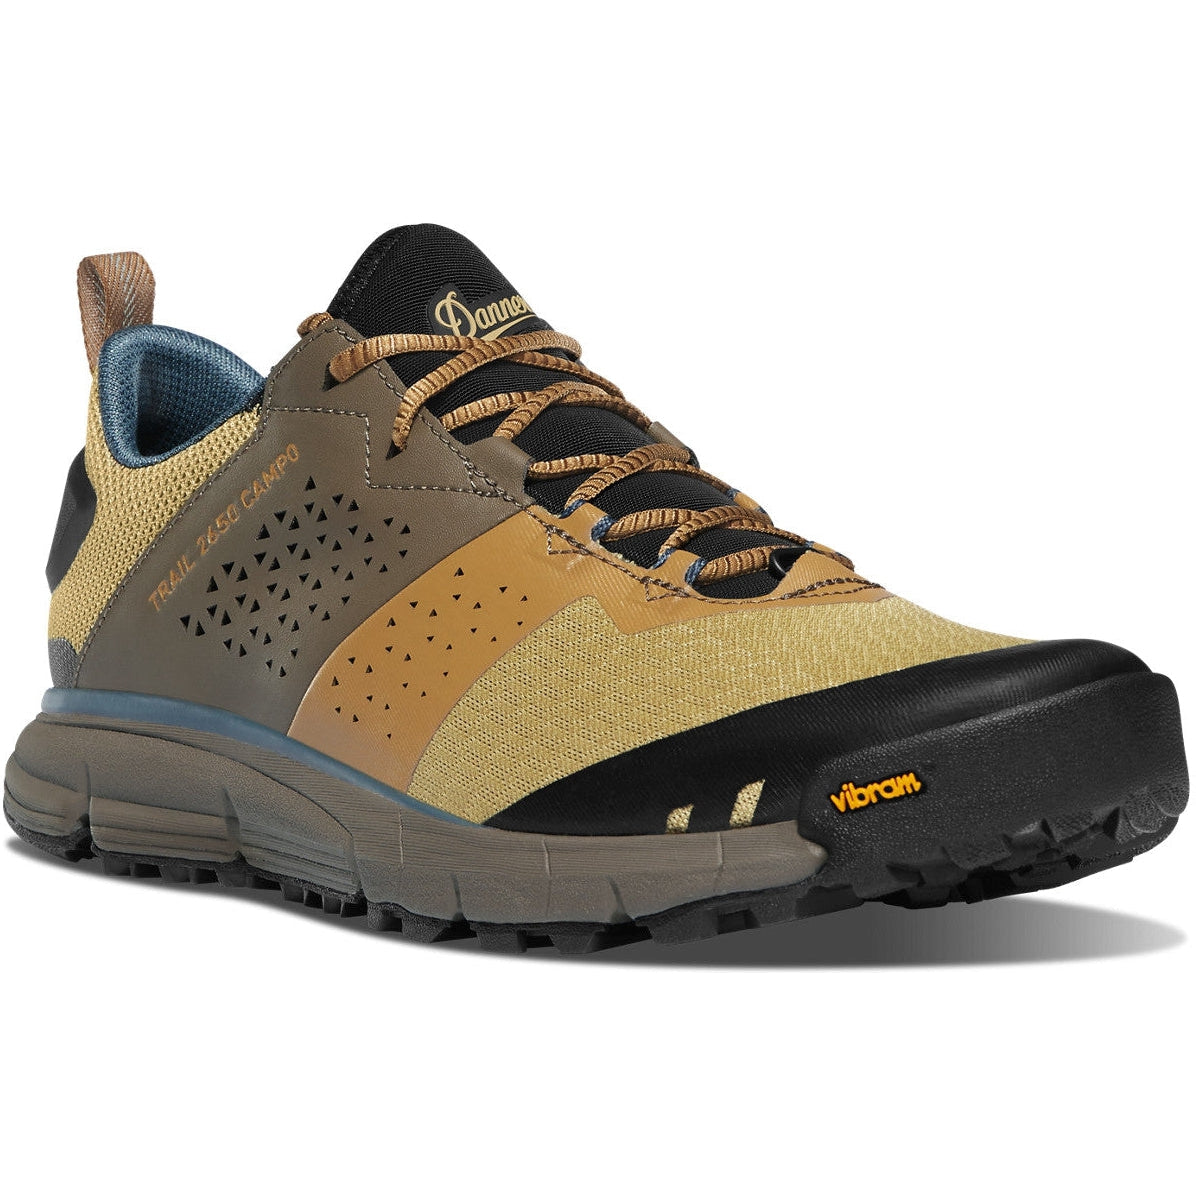 Danner Men's Trail 2650 Campo 3" Hiking Shoe - Brown/Orion Blue - 68945  - Overlook Boots